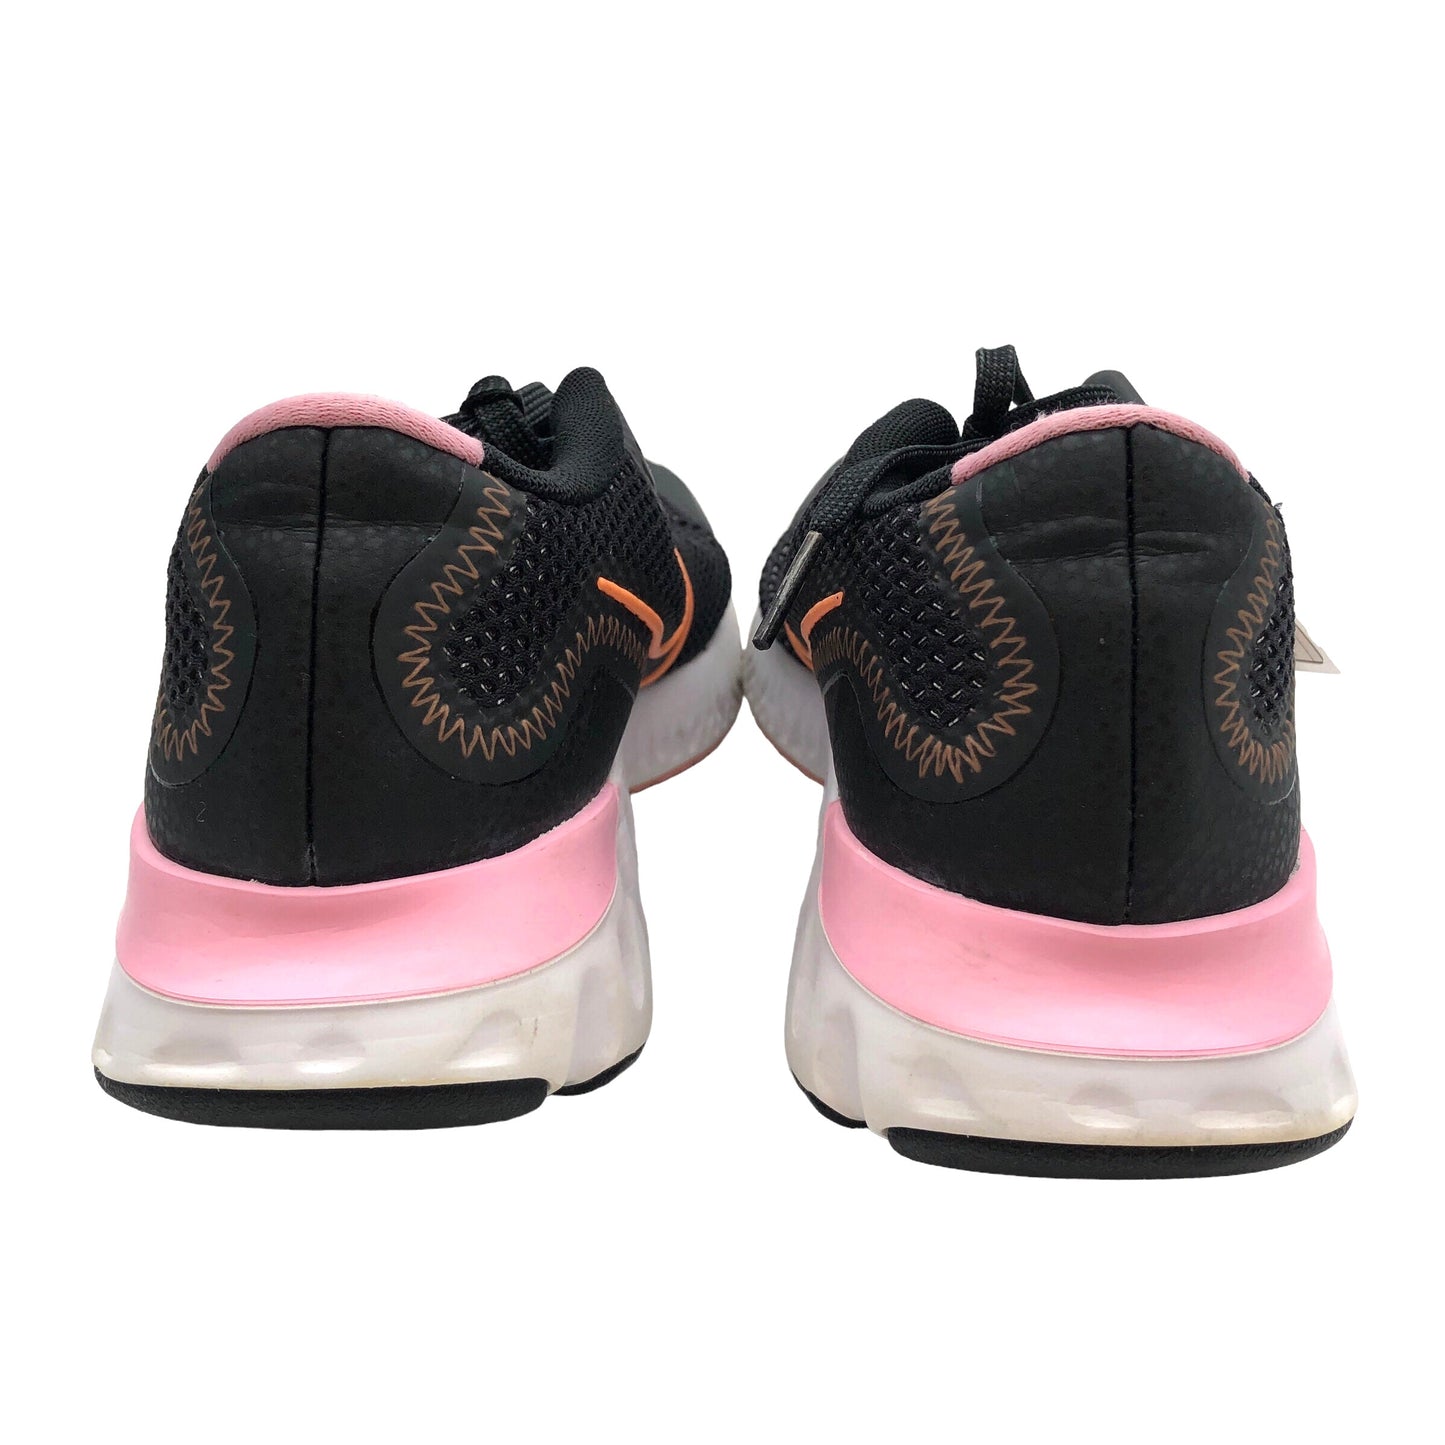 Black & Pink Shoes Athletic Nike, Size 6.5